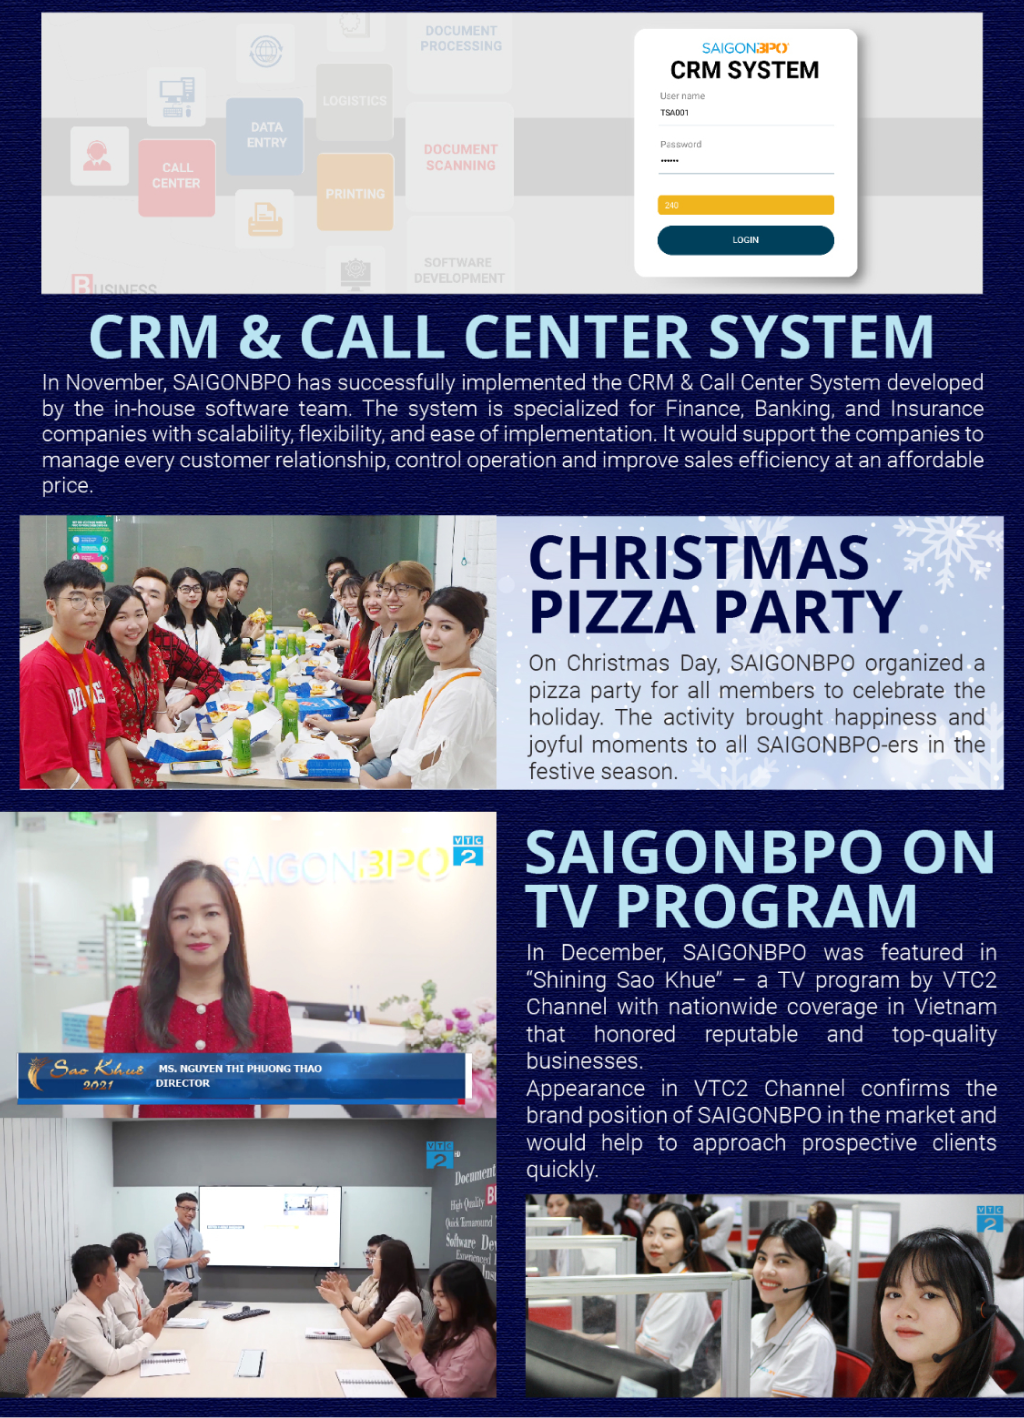 Back to Office; CRM & Call Center; Christmas Pizza Party; On TV Program